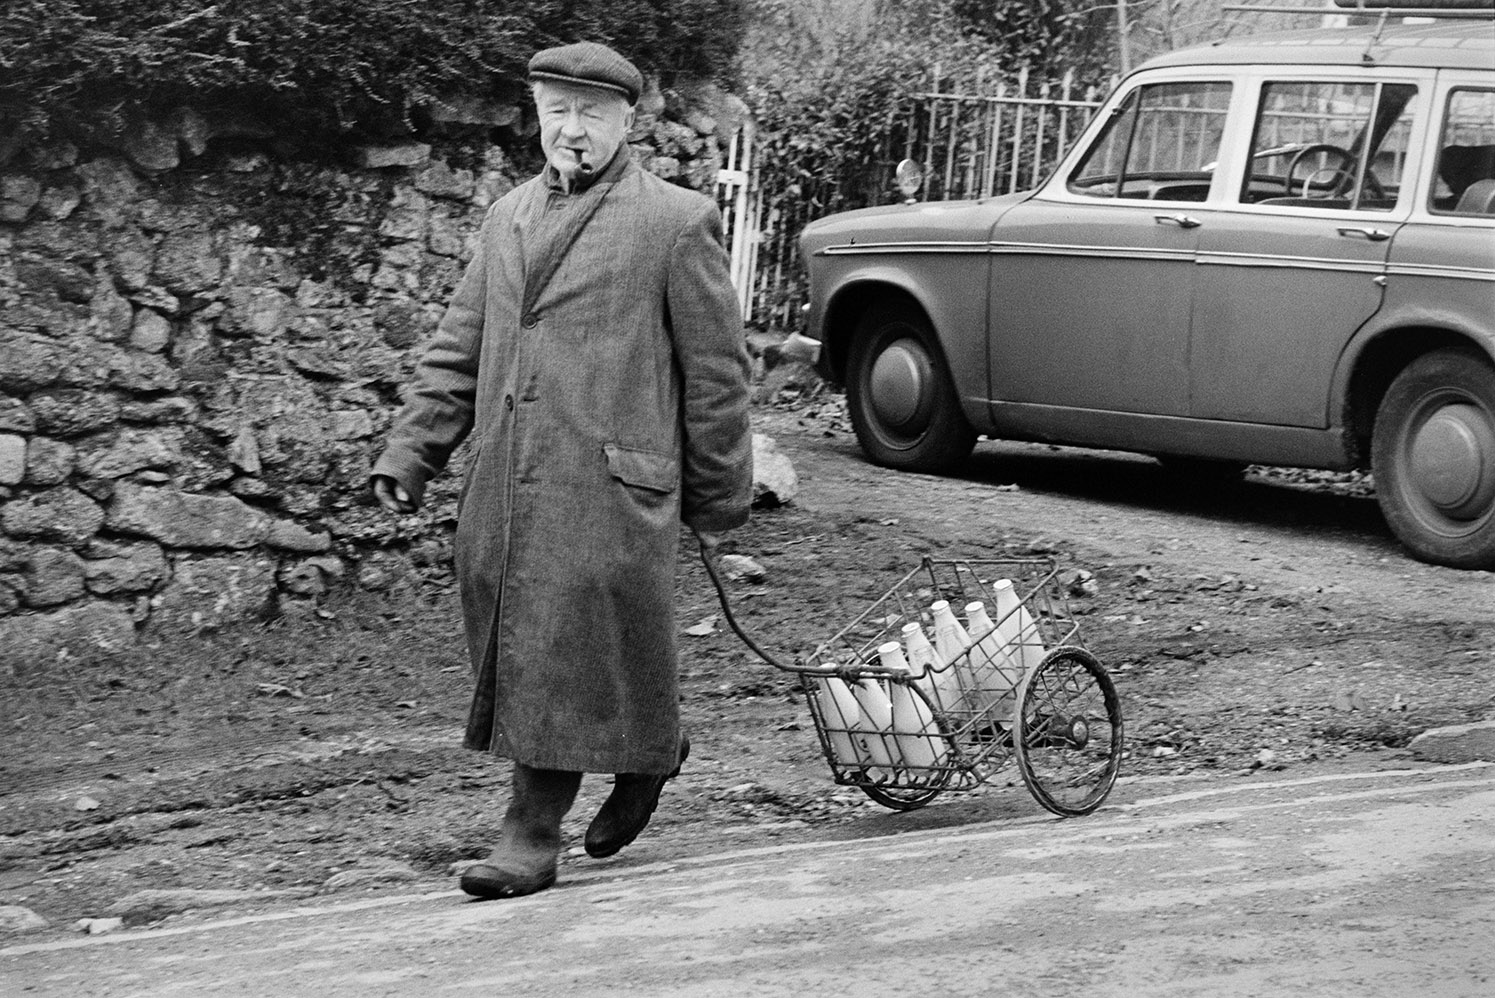 A man delivering milk on Dartmoor, using a small cart. He is walking past a parked car and stone wall, and is smoking a pipe.